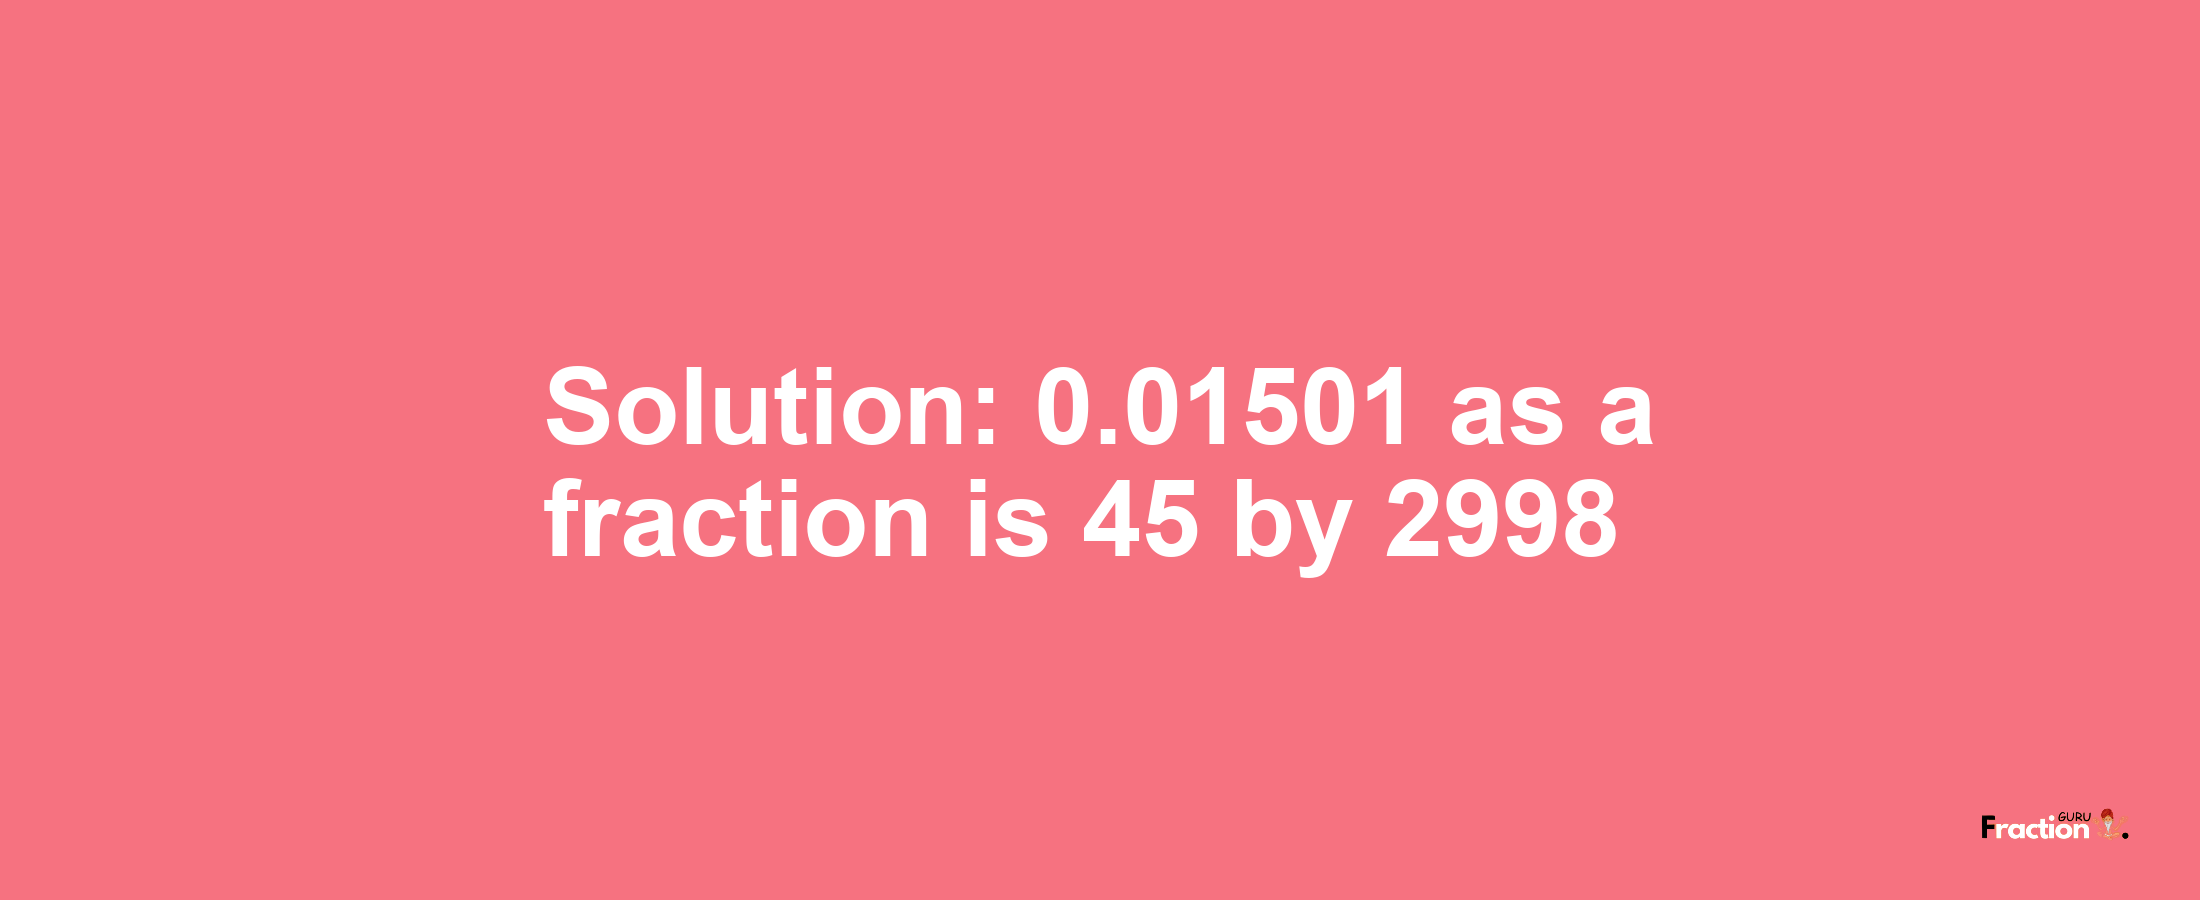 Solution:0.01501 as a fraction is 45/2998